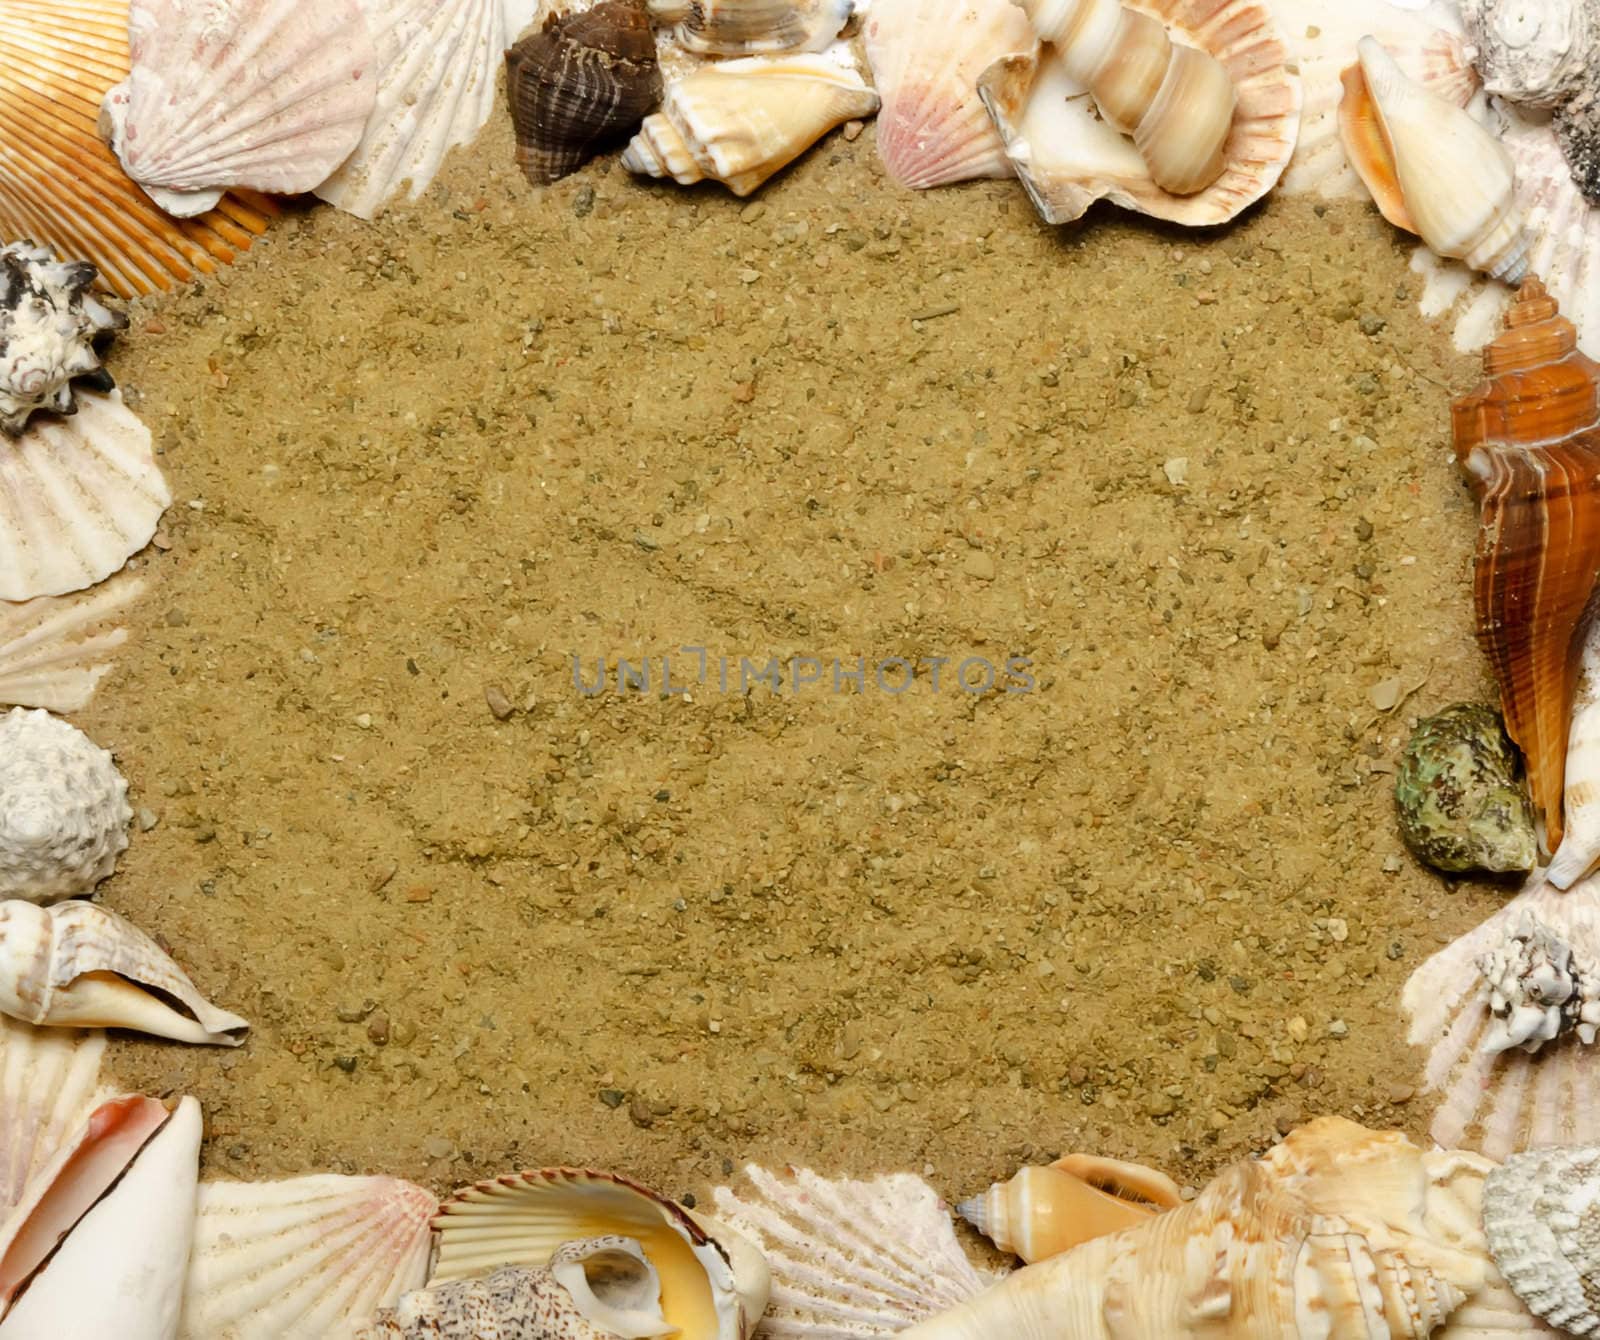 frame made of shells, place for text